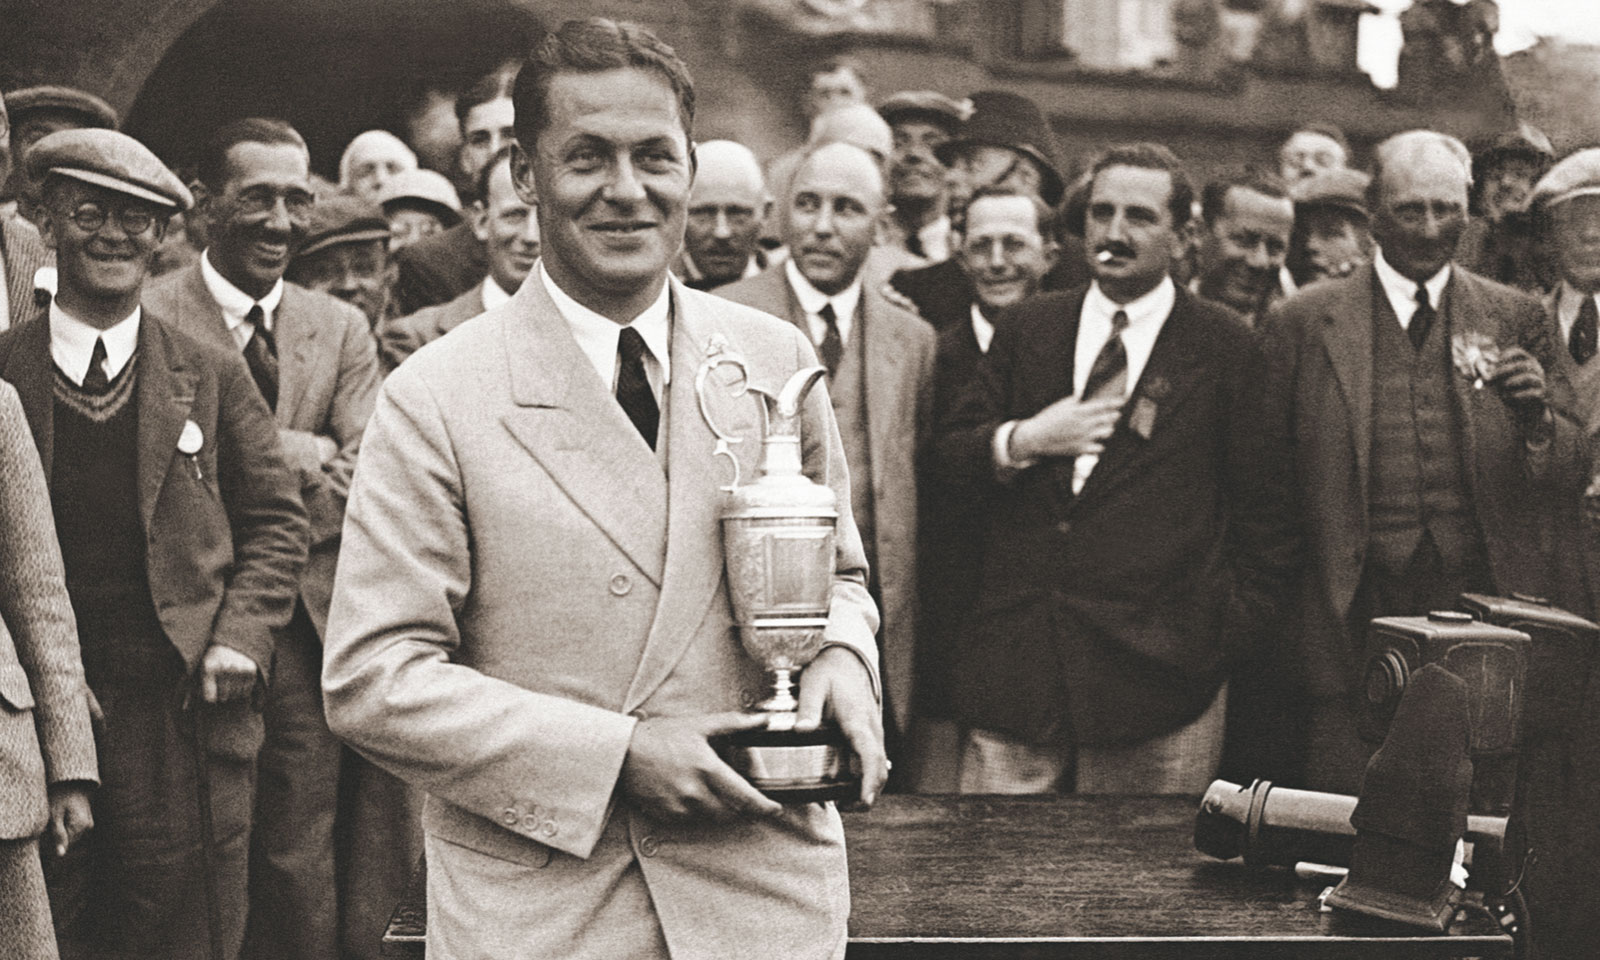 n-1927-Bobby-Jones-celebrated-his-historical-Open-Championship-win-at-the-Old-Course-at-St.-Andrews